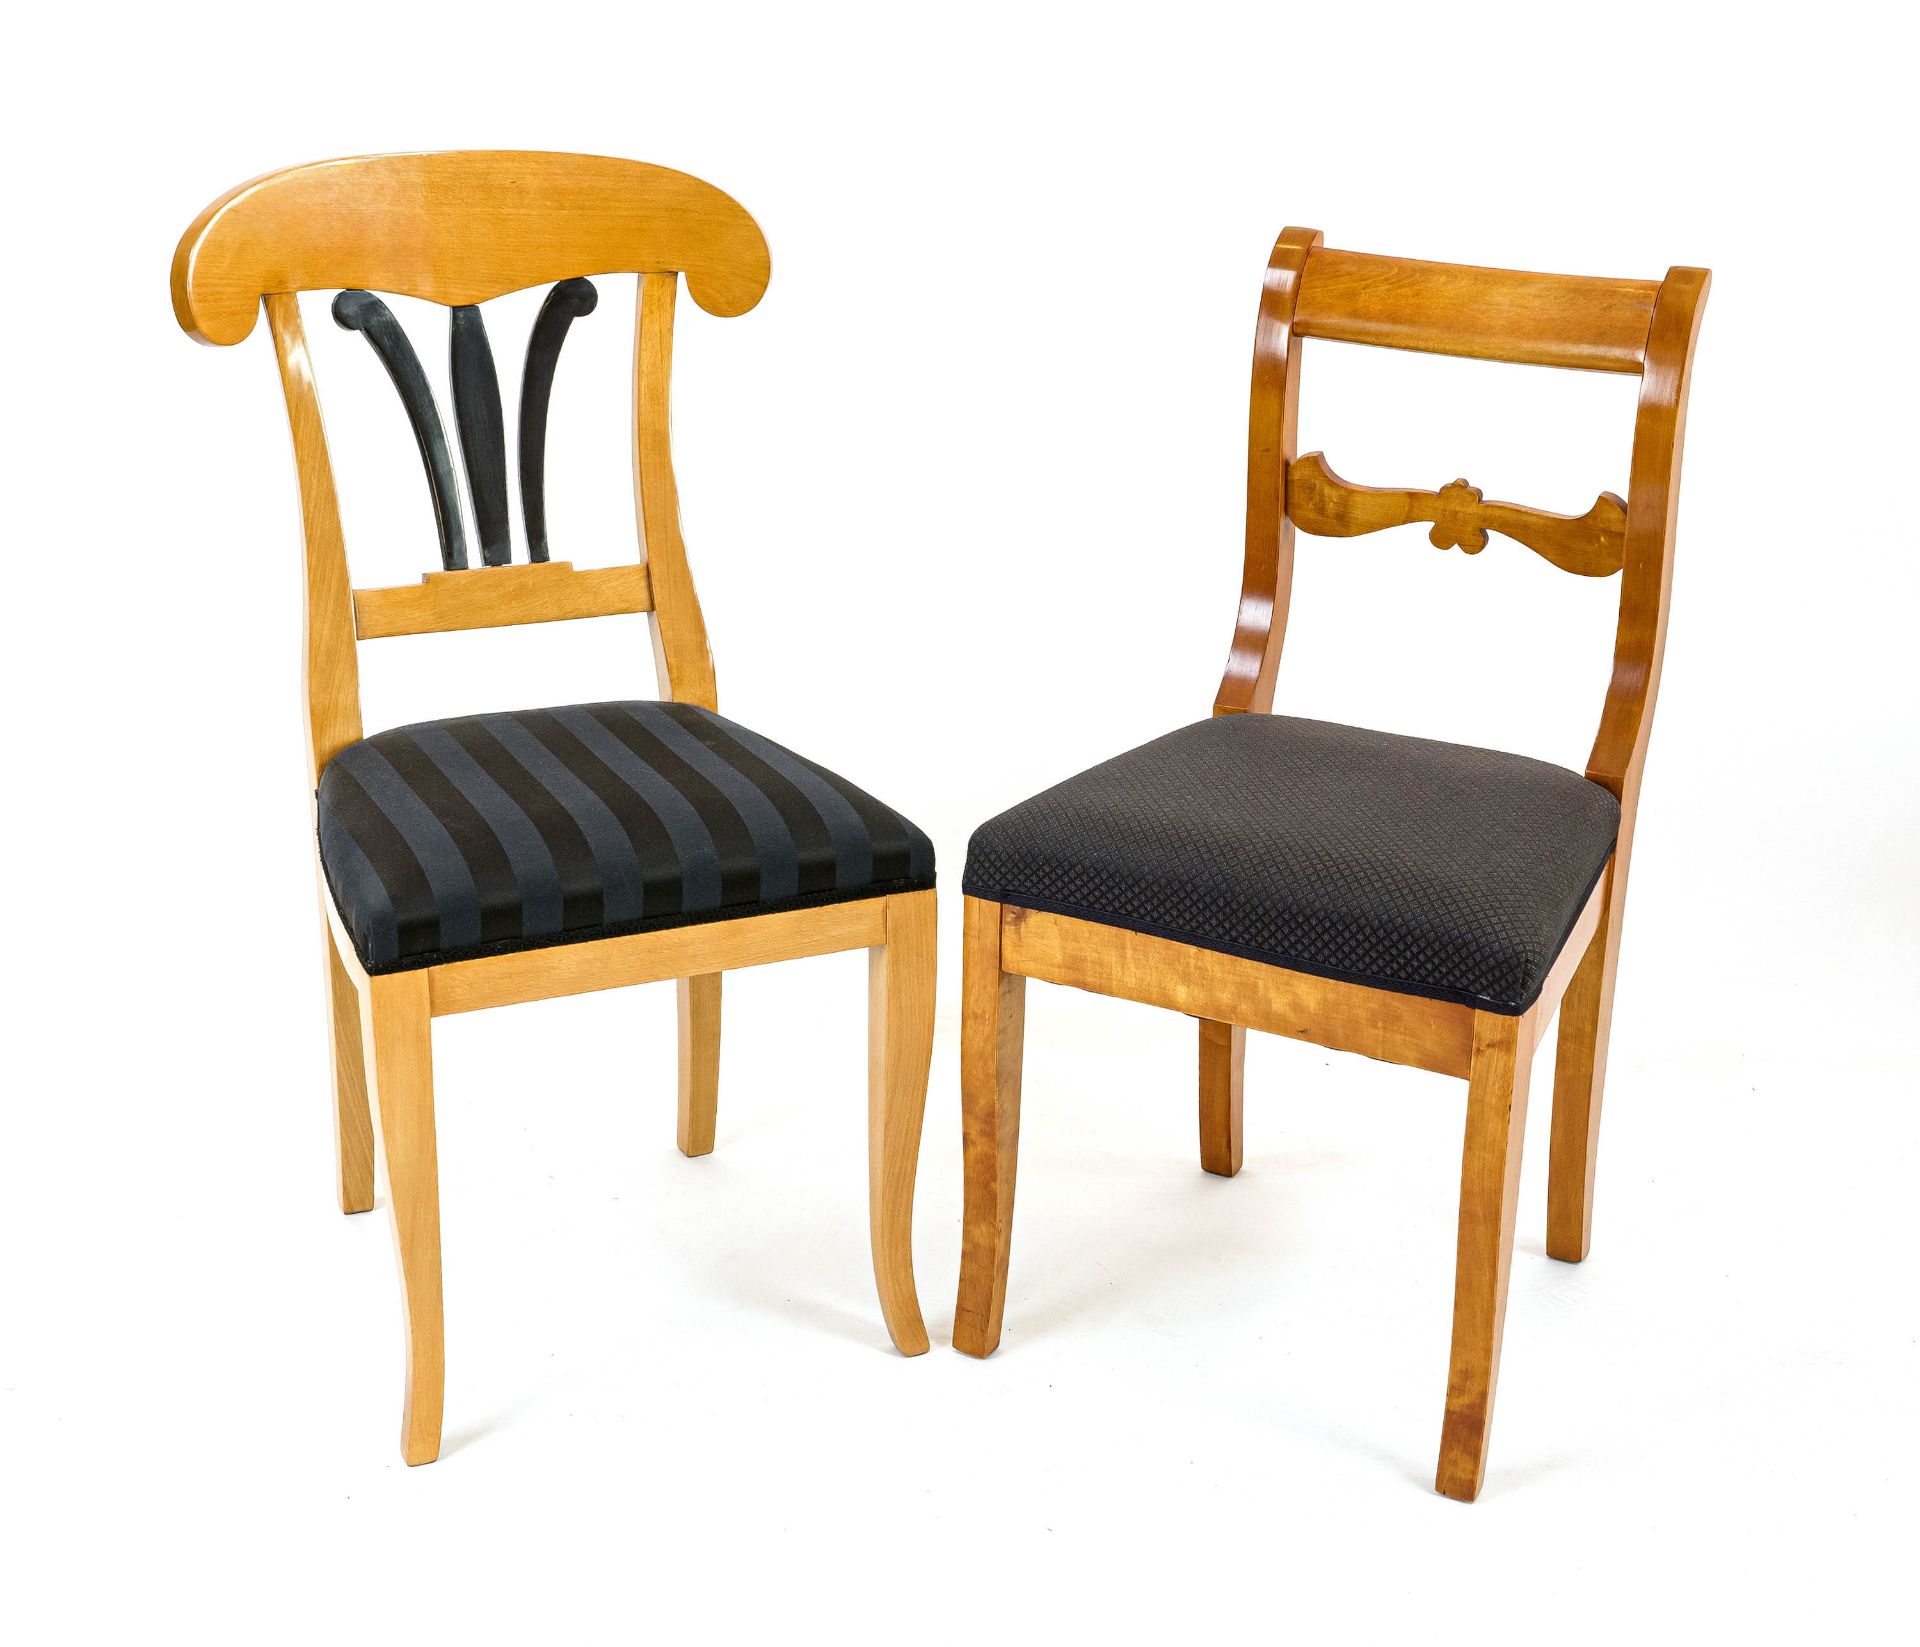 Two chairs in Biedermeier style, 20th century, birch and beech, as new, h. 85/90 cm - The